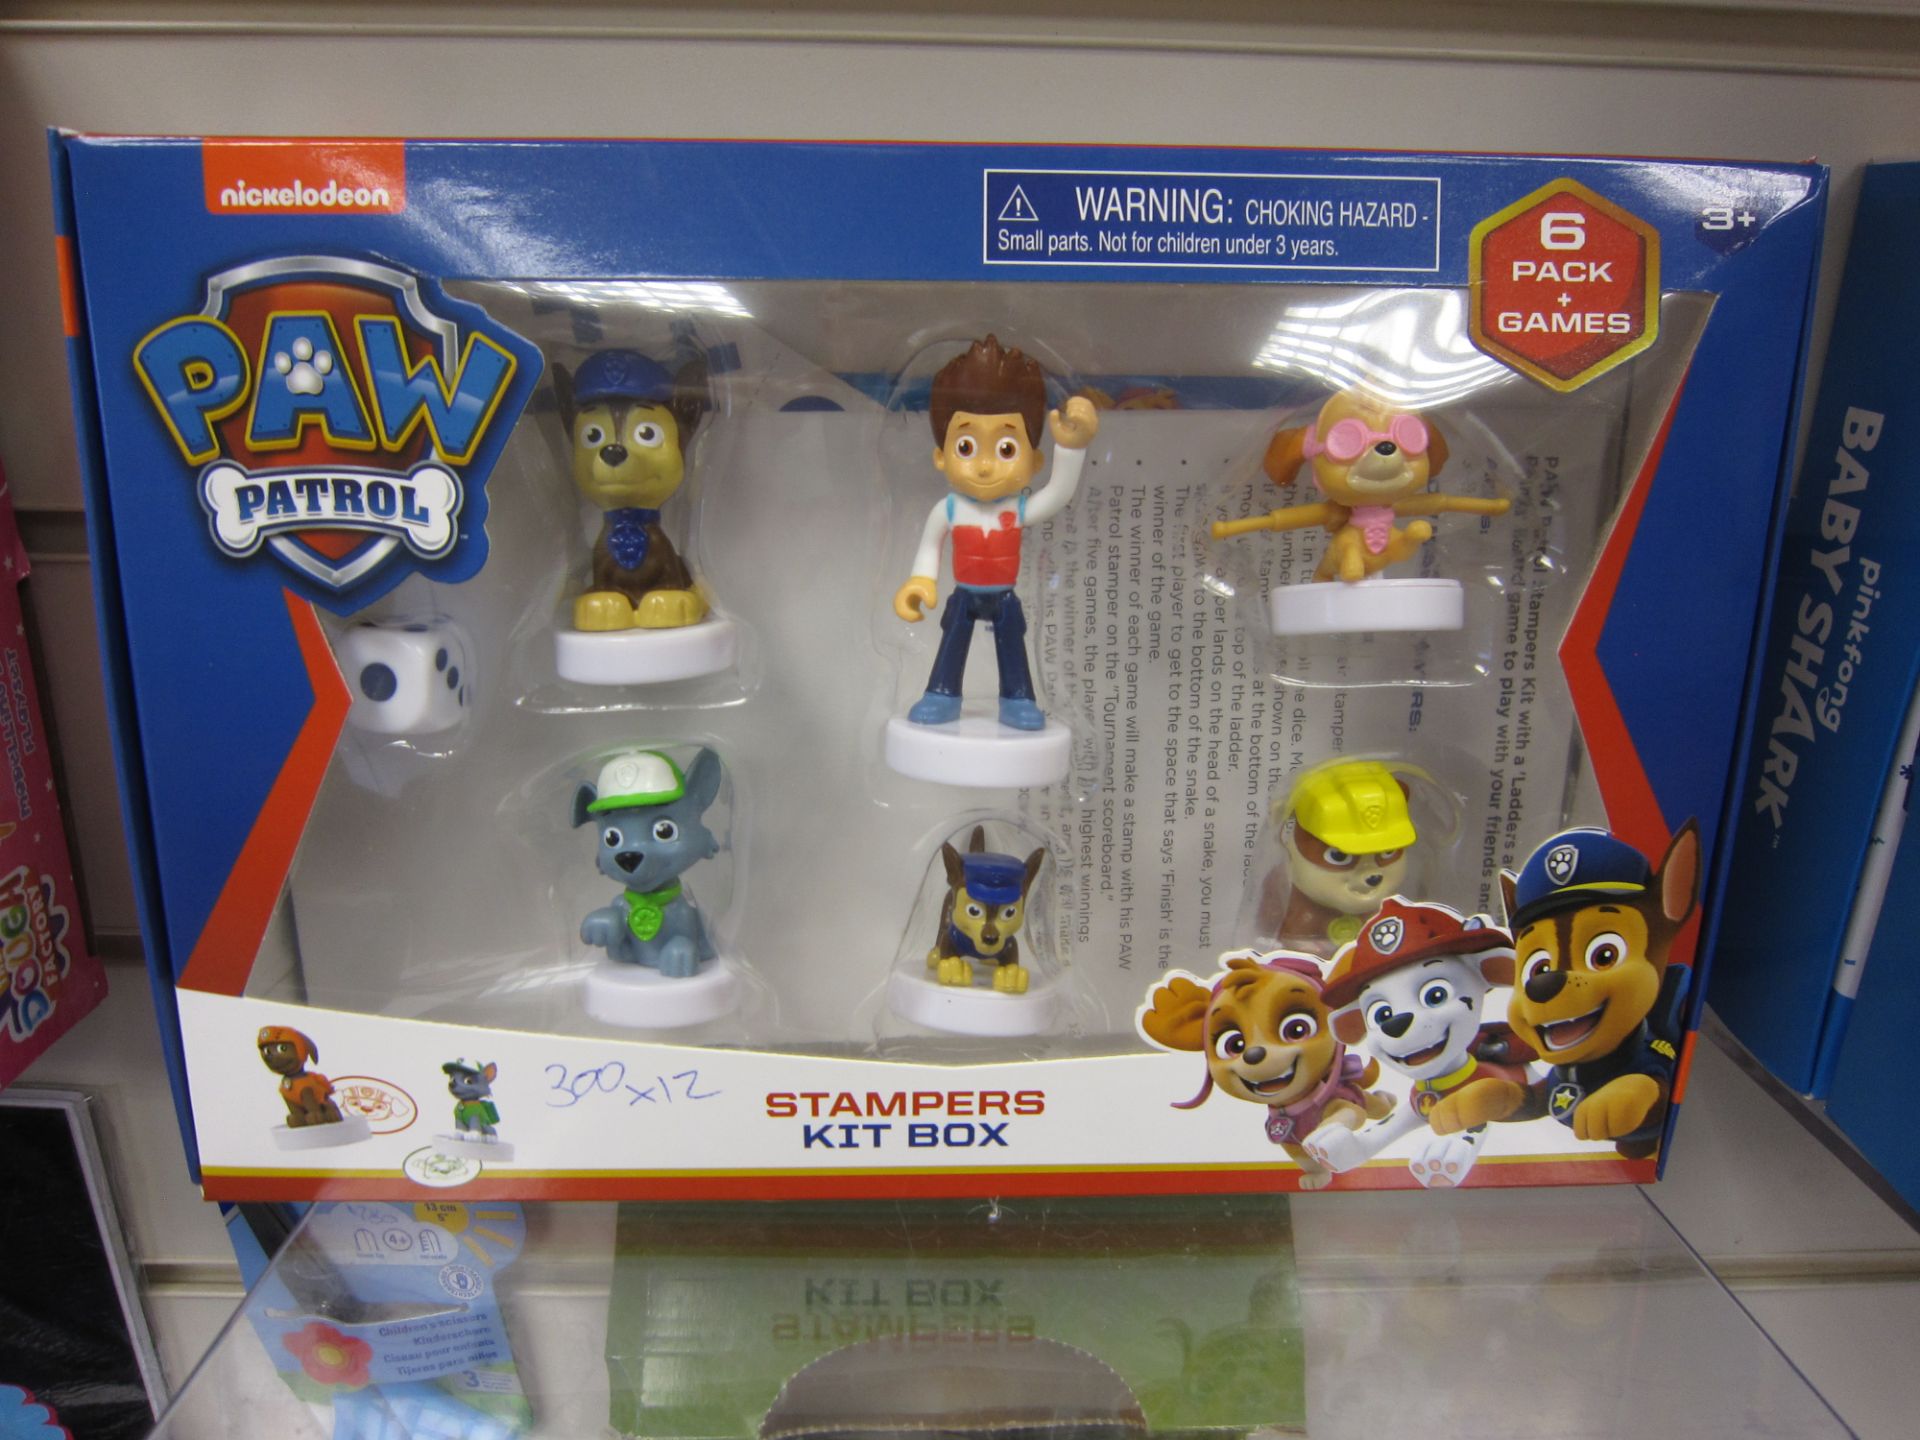 10 Pcs Paw Patrol Brand New Sealed 6 Pack Stamper Set With Games In Side Such As Snakes & Ladders